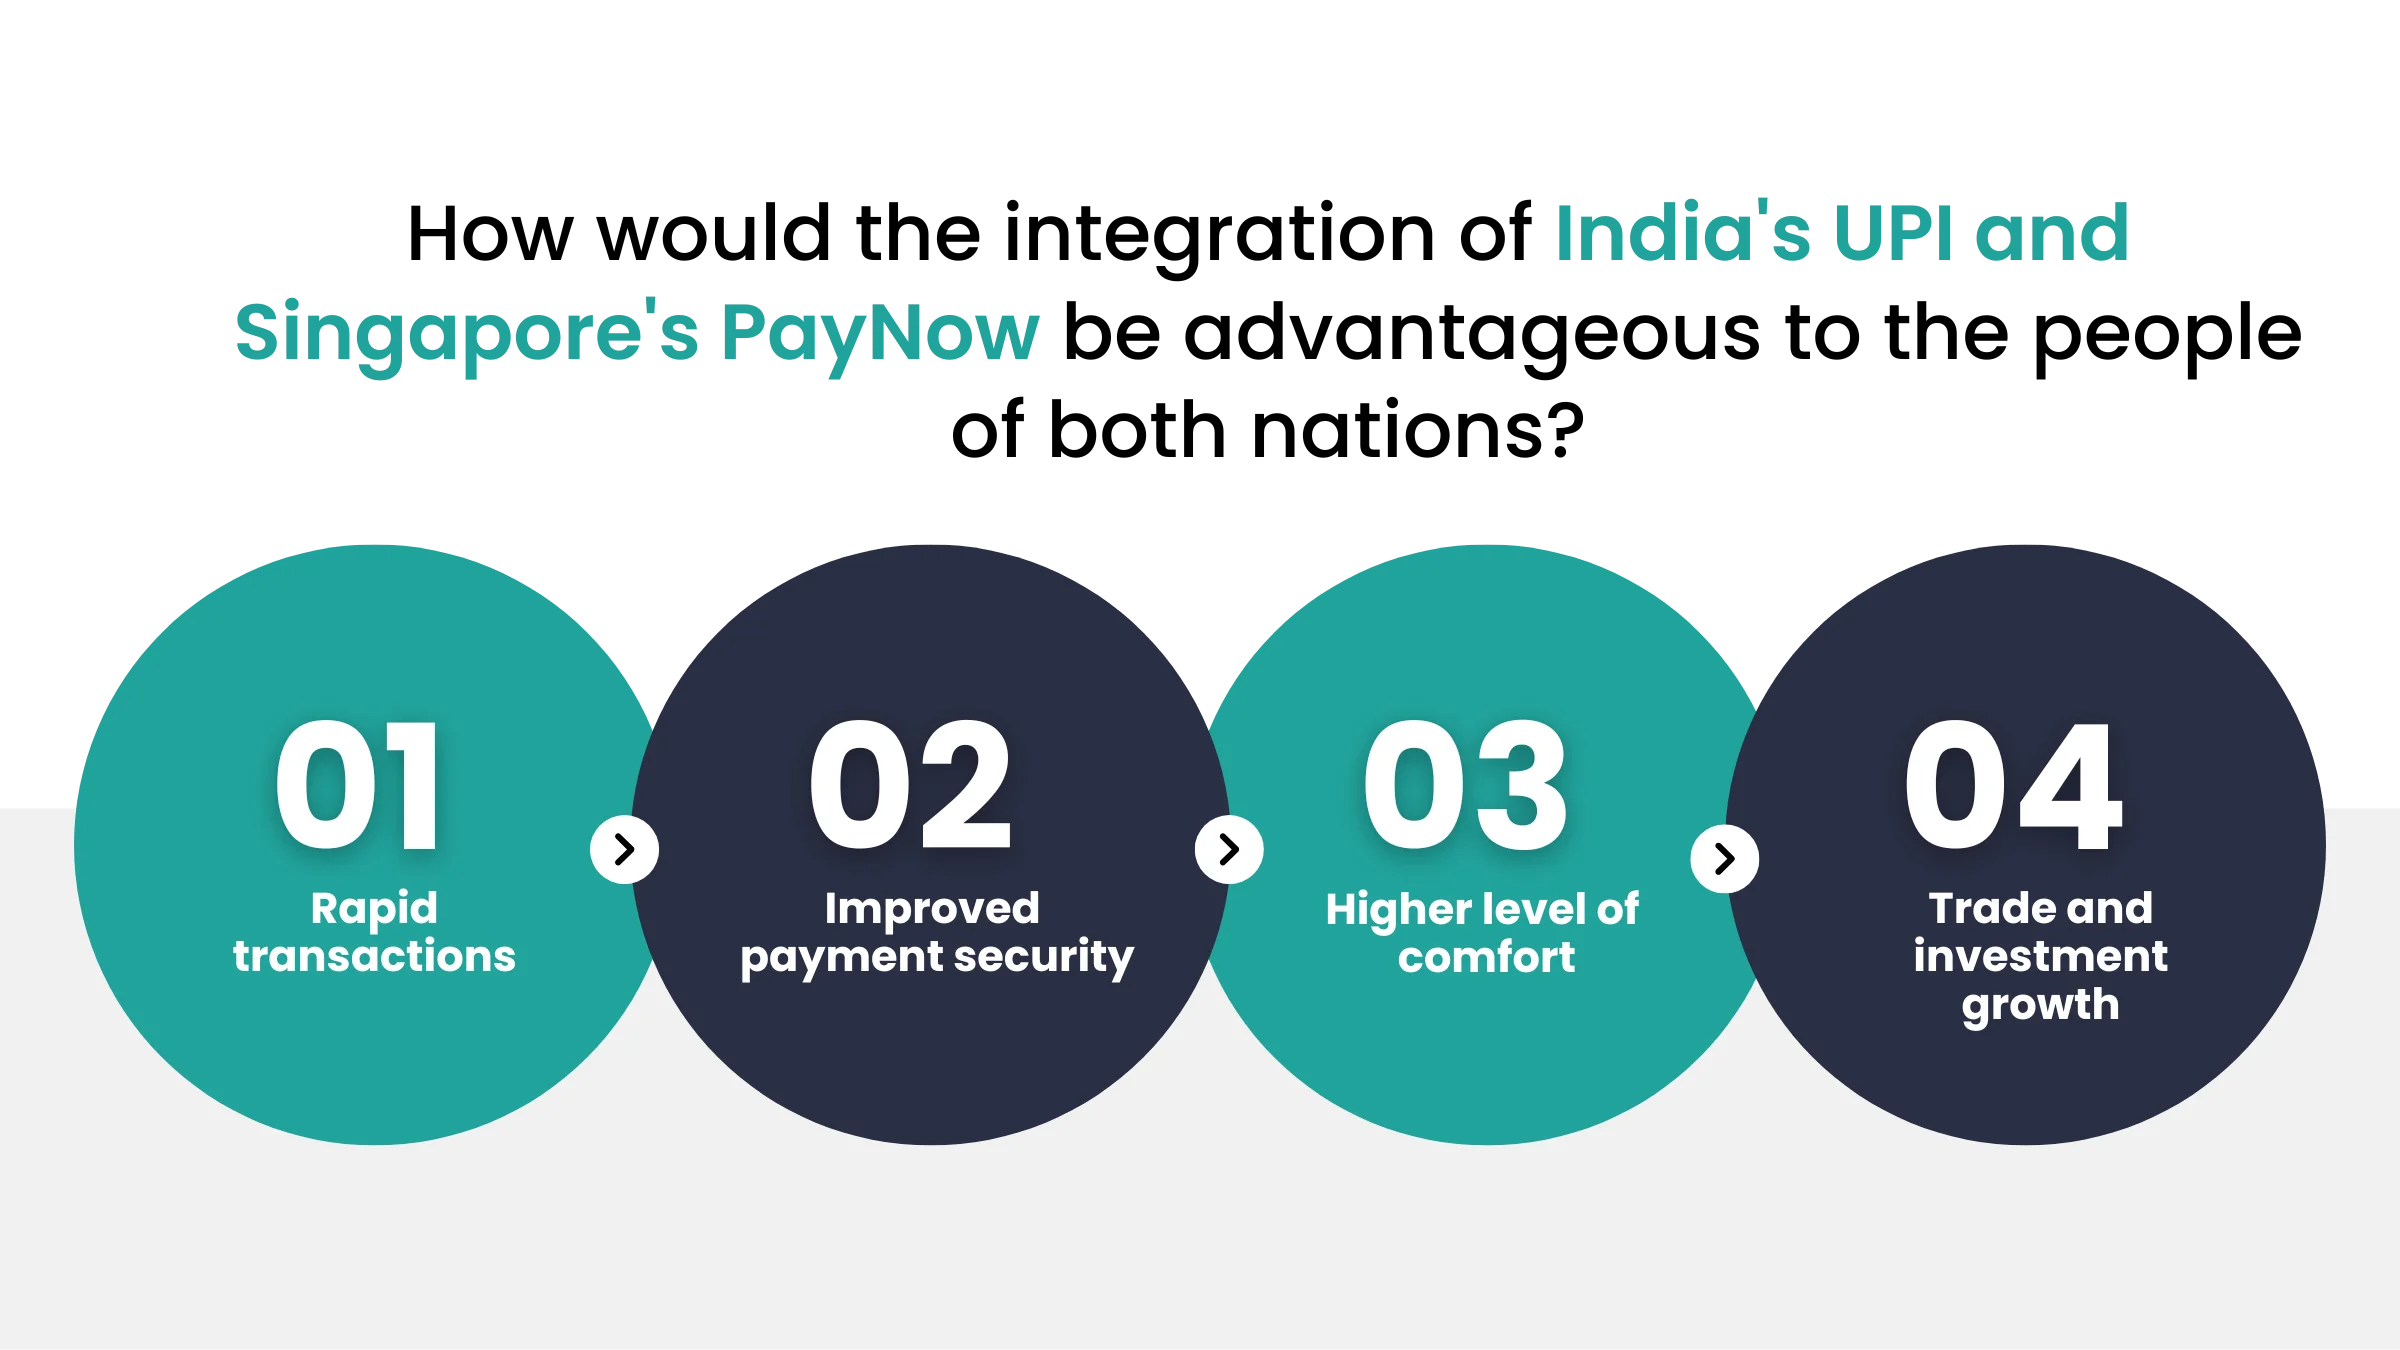 benefits of intergration of india's upi and singapore's paynow